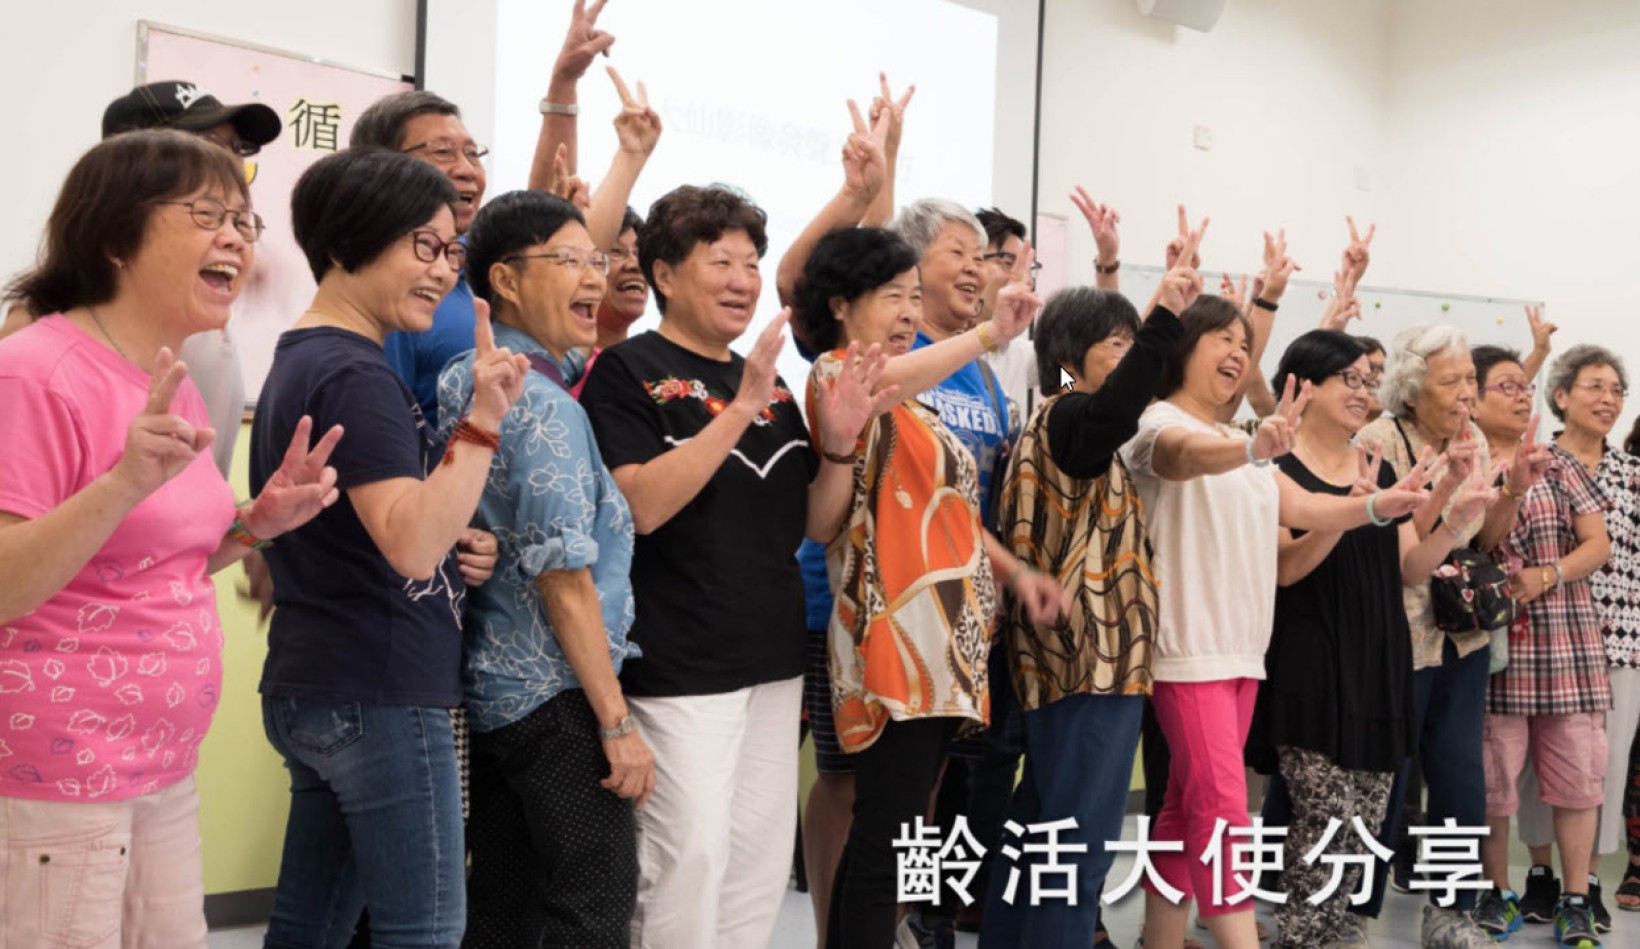 LU joins Jockey Club Age-Friendly City Project to train elderly ambassadors and promote the scheme 